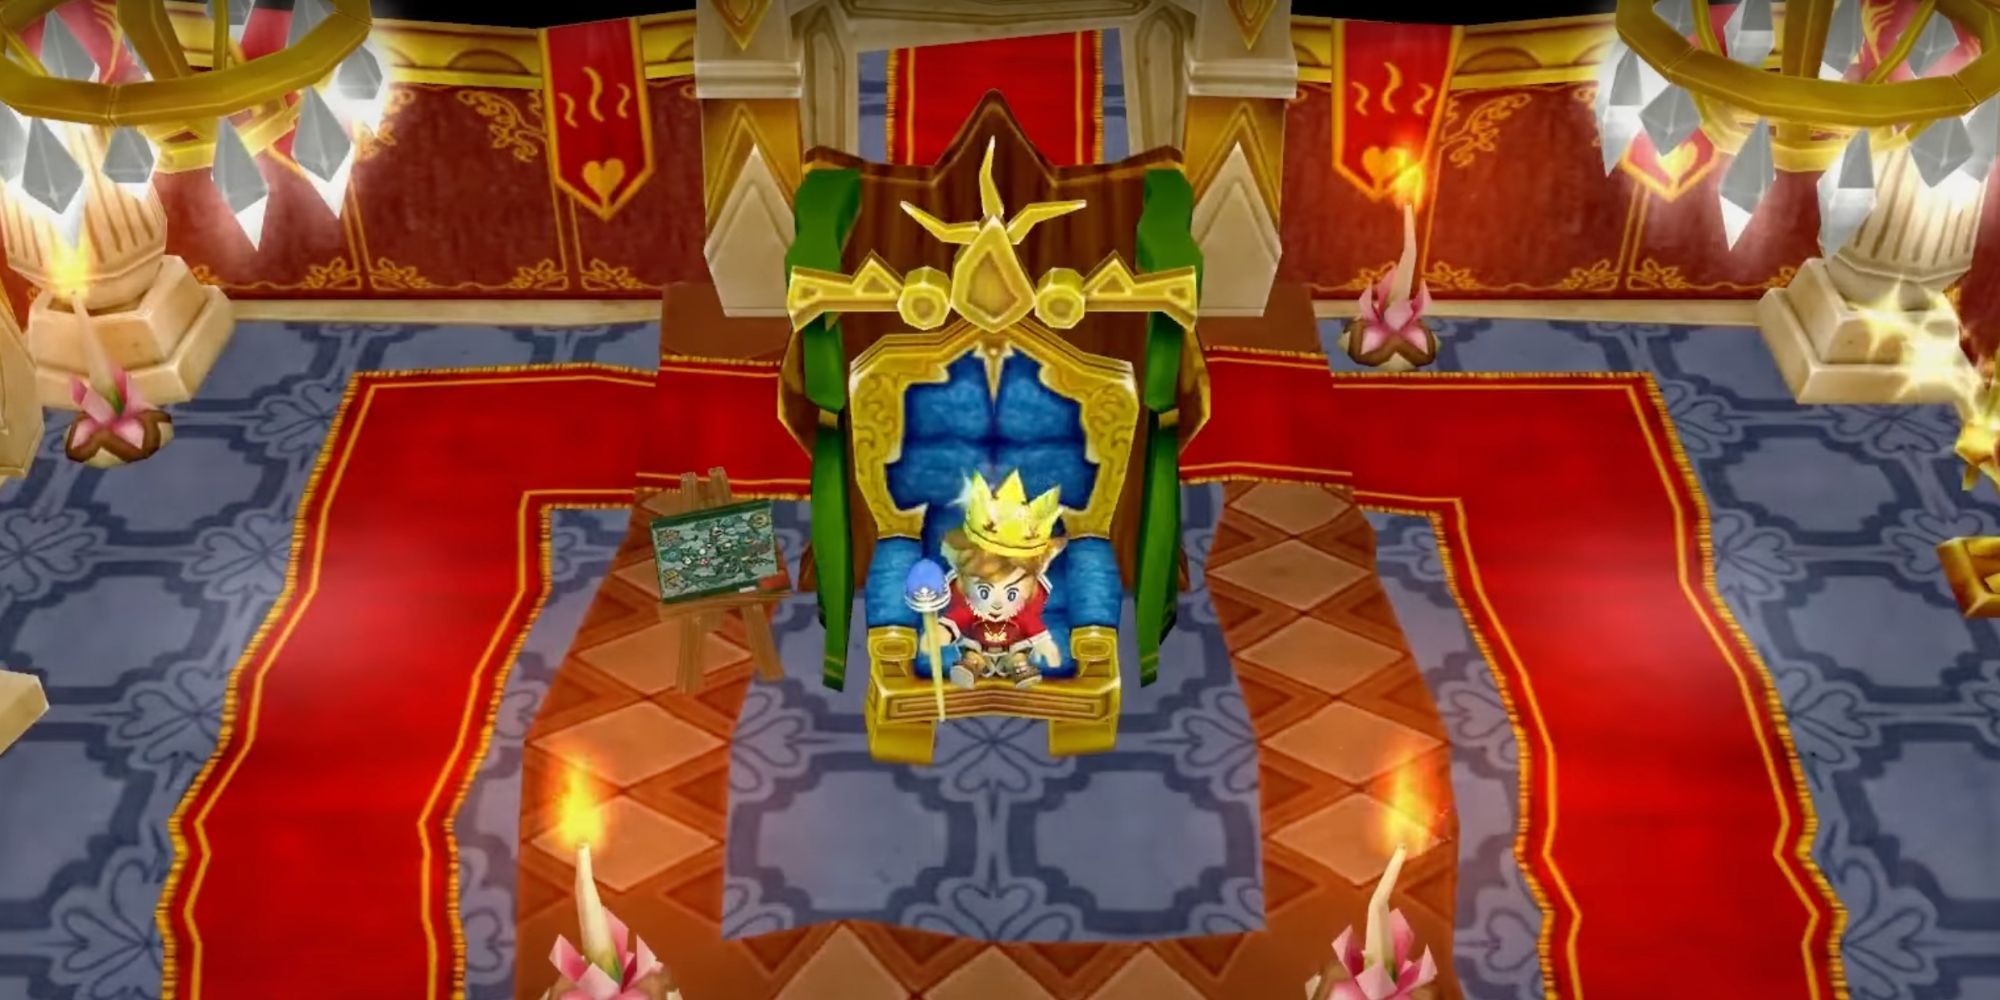 Corobo on his throne in Little King's Story.